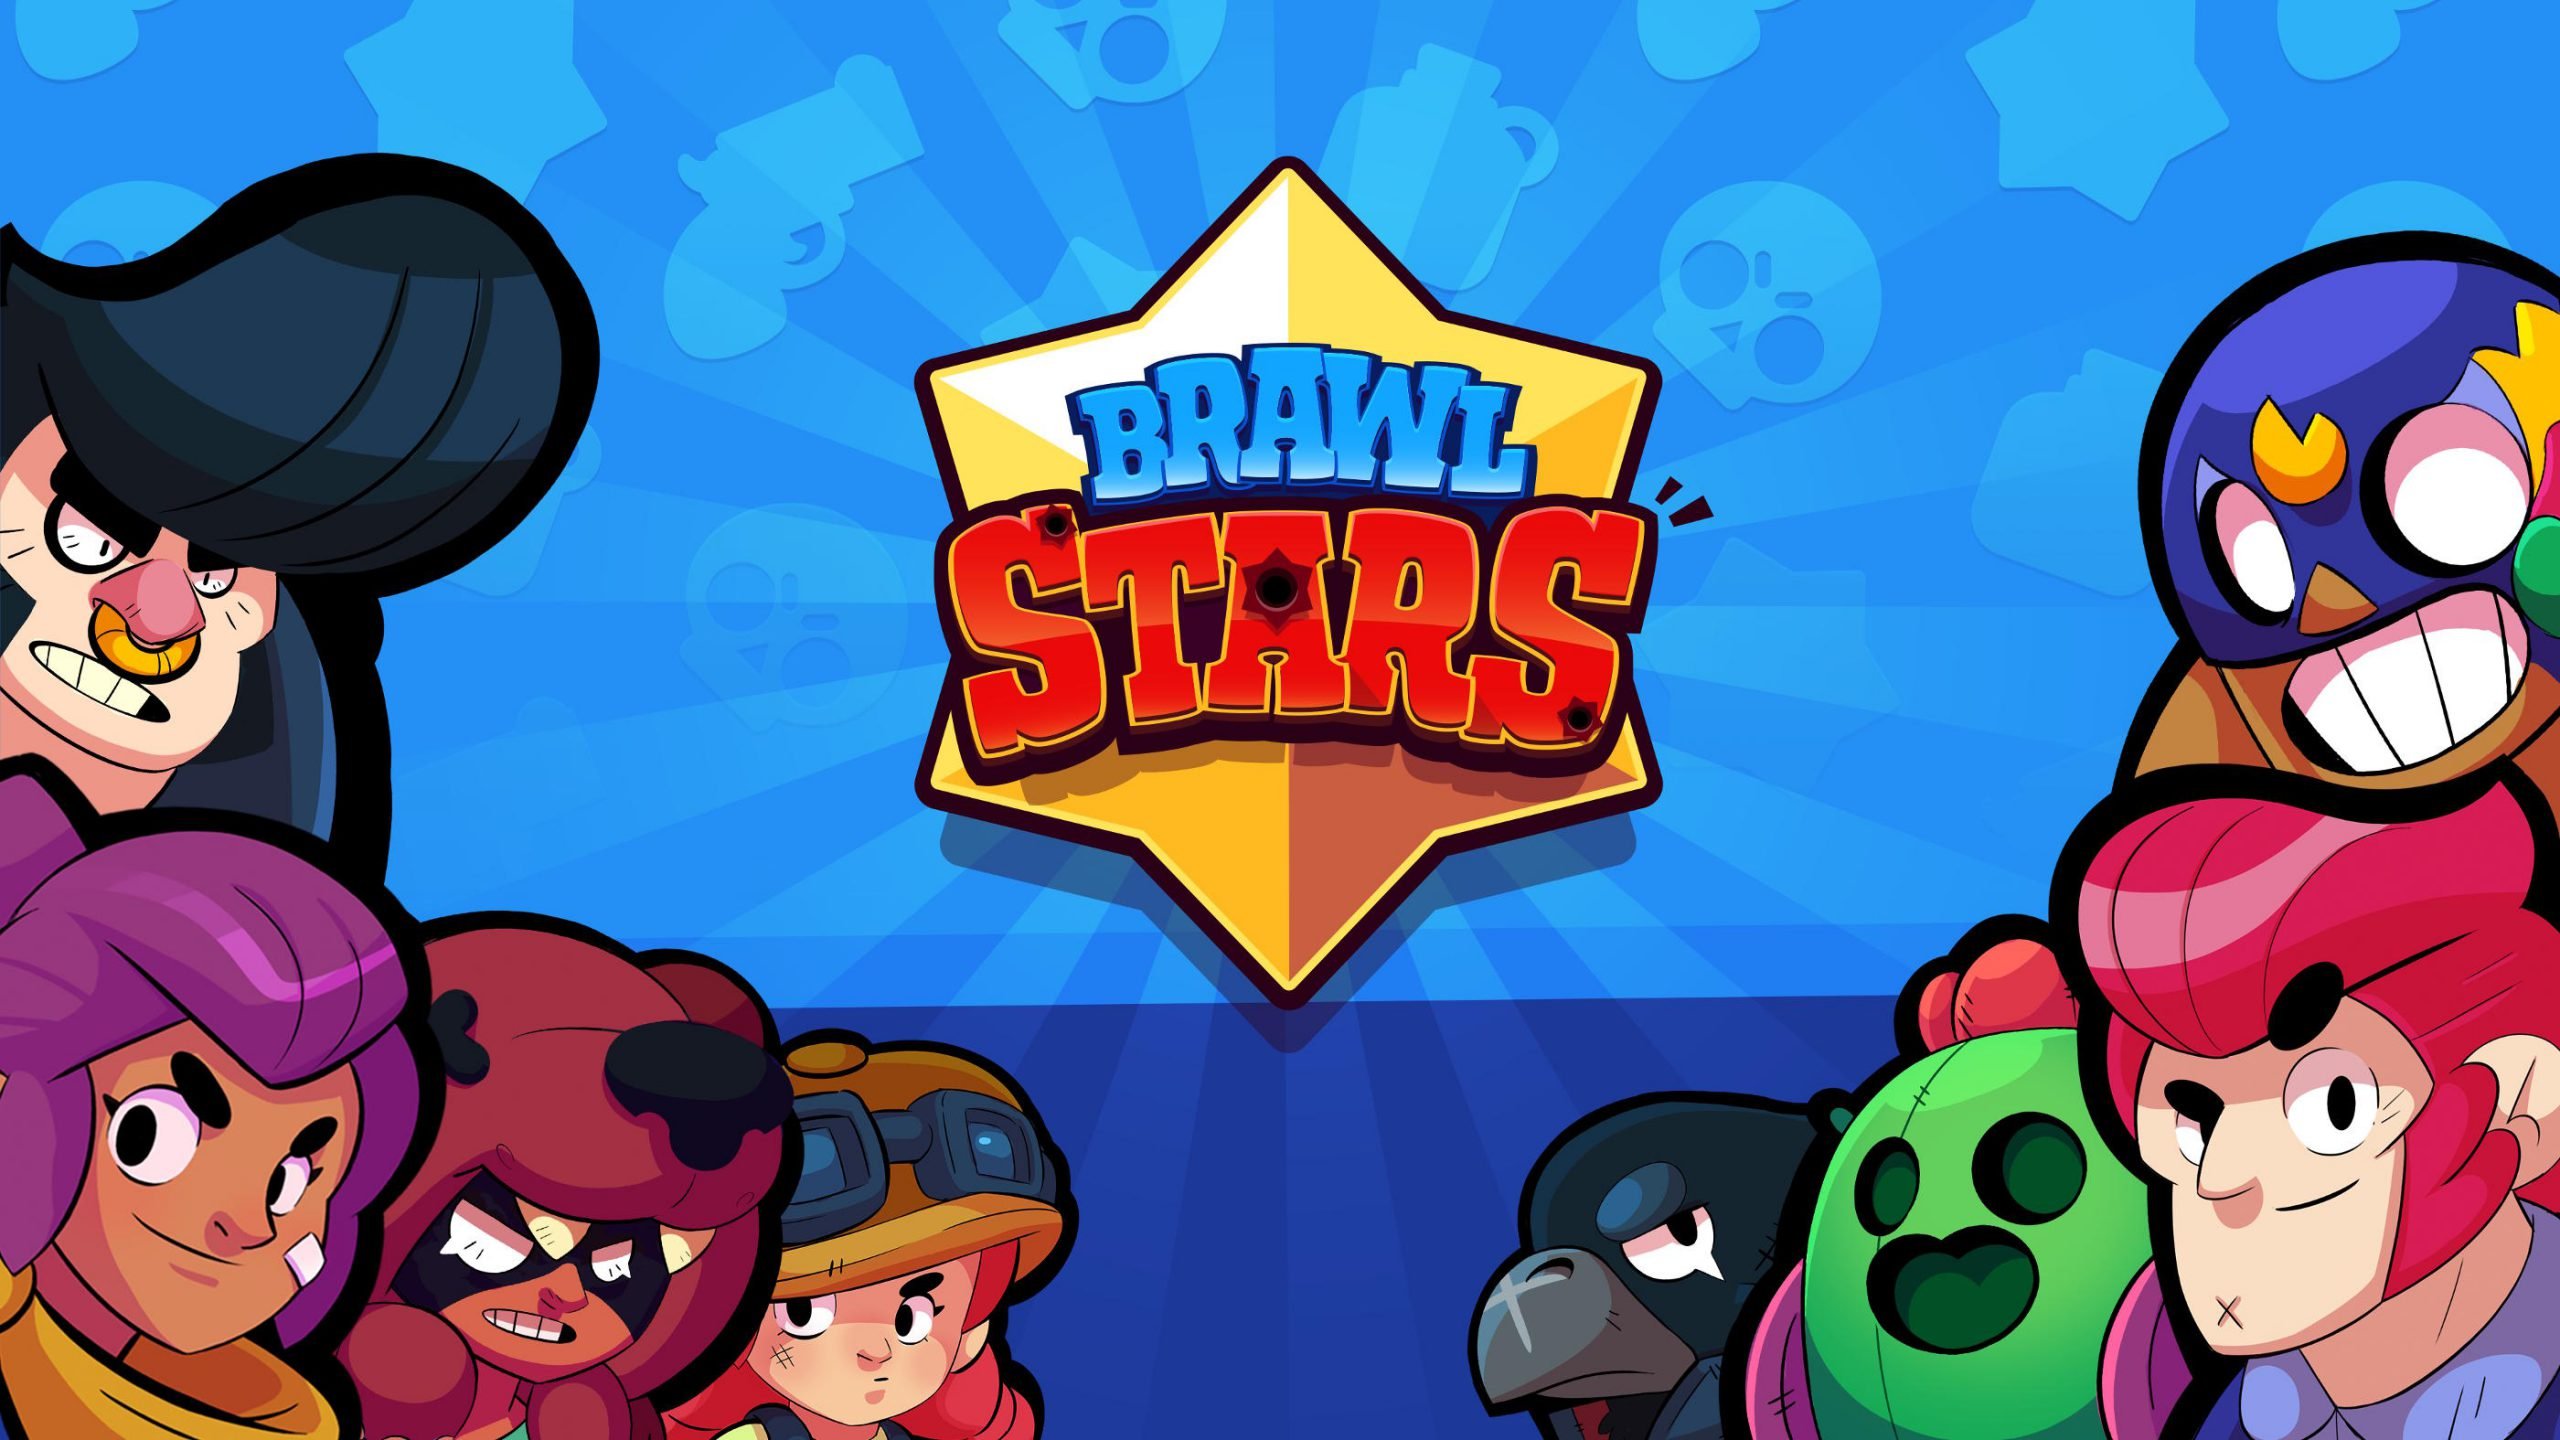 Brawl Stars Character Guide: How to Play Shelly